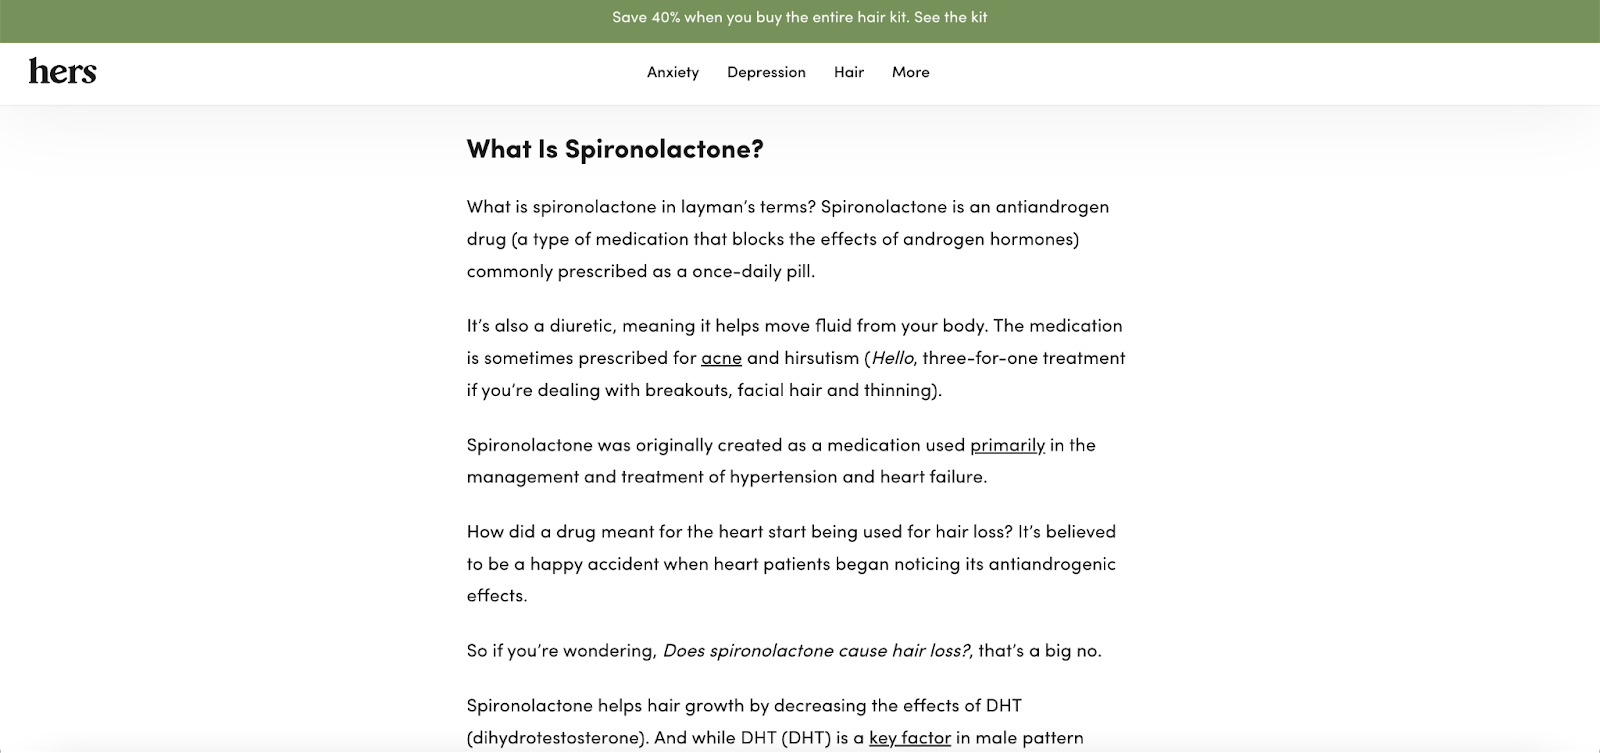 The image shows description of Spironolactone, one of the products of Hers. It's an effort to provide users with clear details of the product.